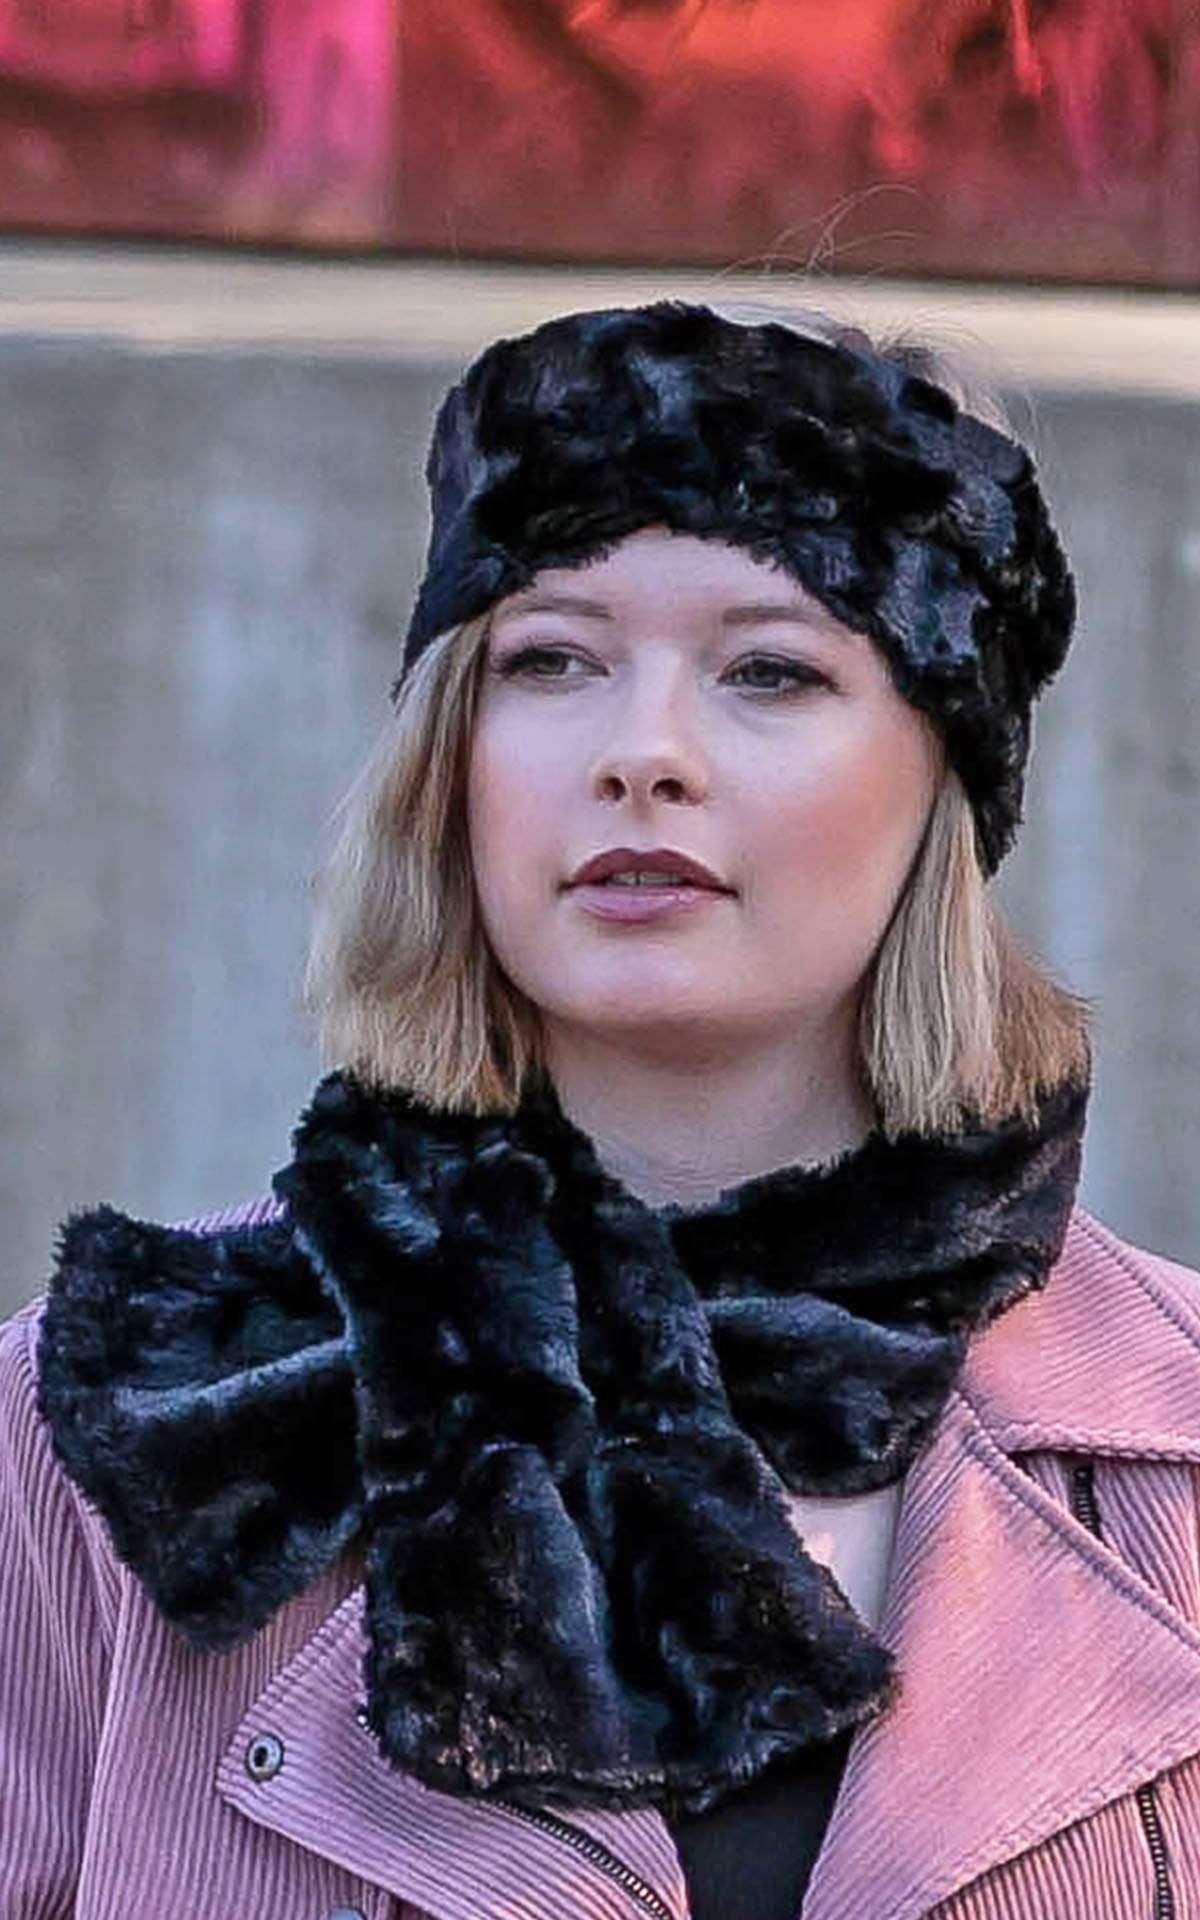 Product shot of Women’s reversible Pull Through Scarf | Savannah Cat Faux Fur Animal Print in black creams and grays with Cuddly Faux Fur in Black| Handmade in Seattle WA | Pandemonium Millinery